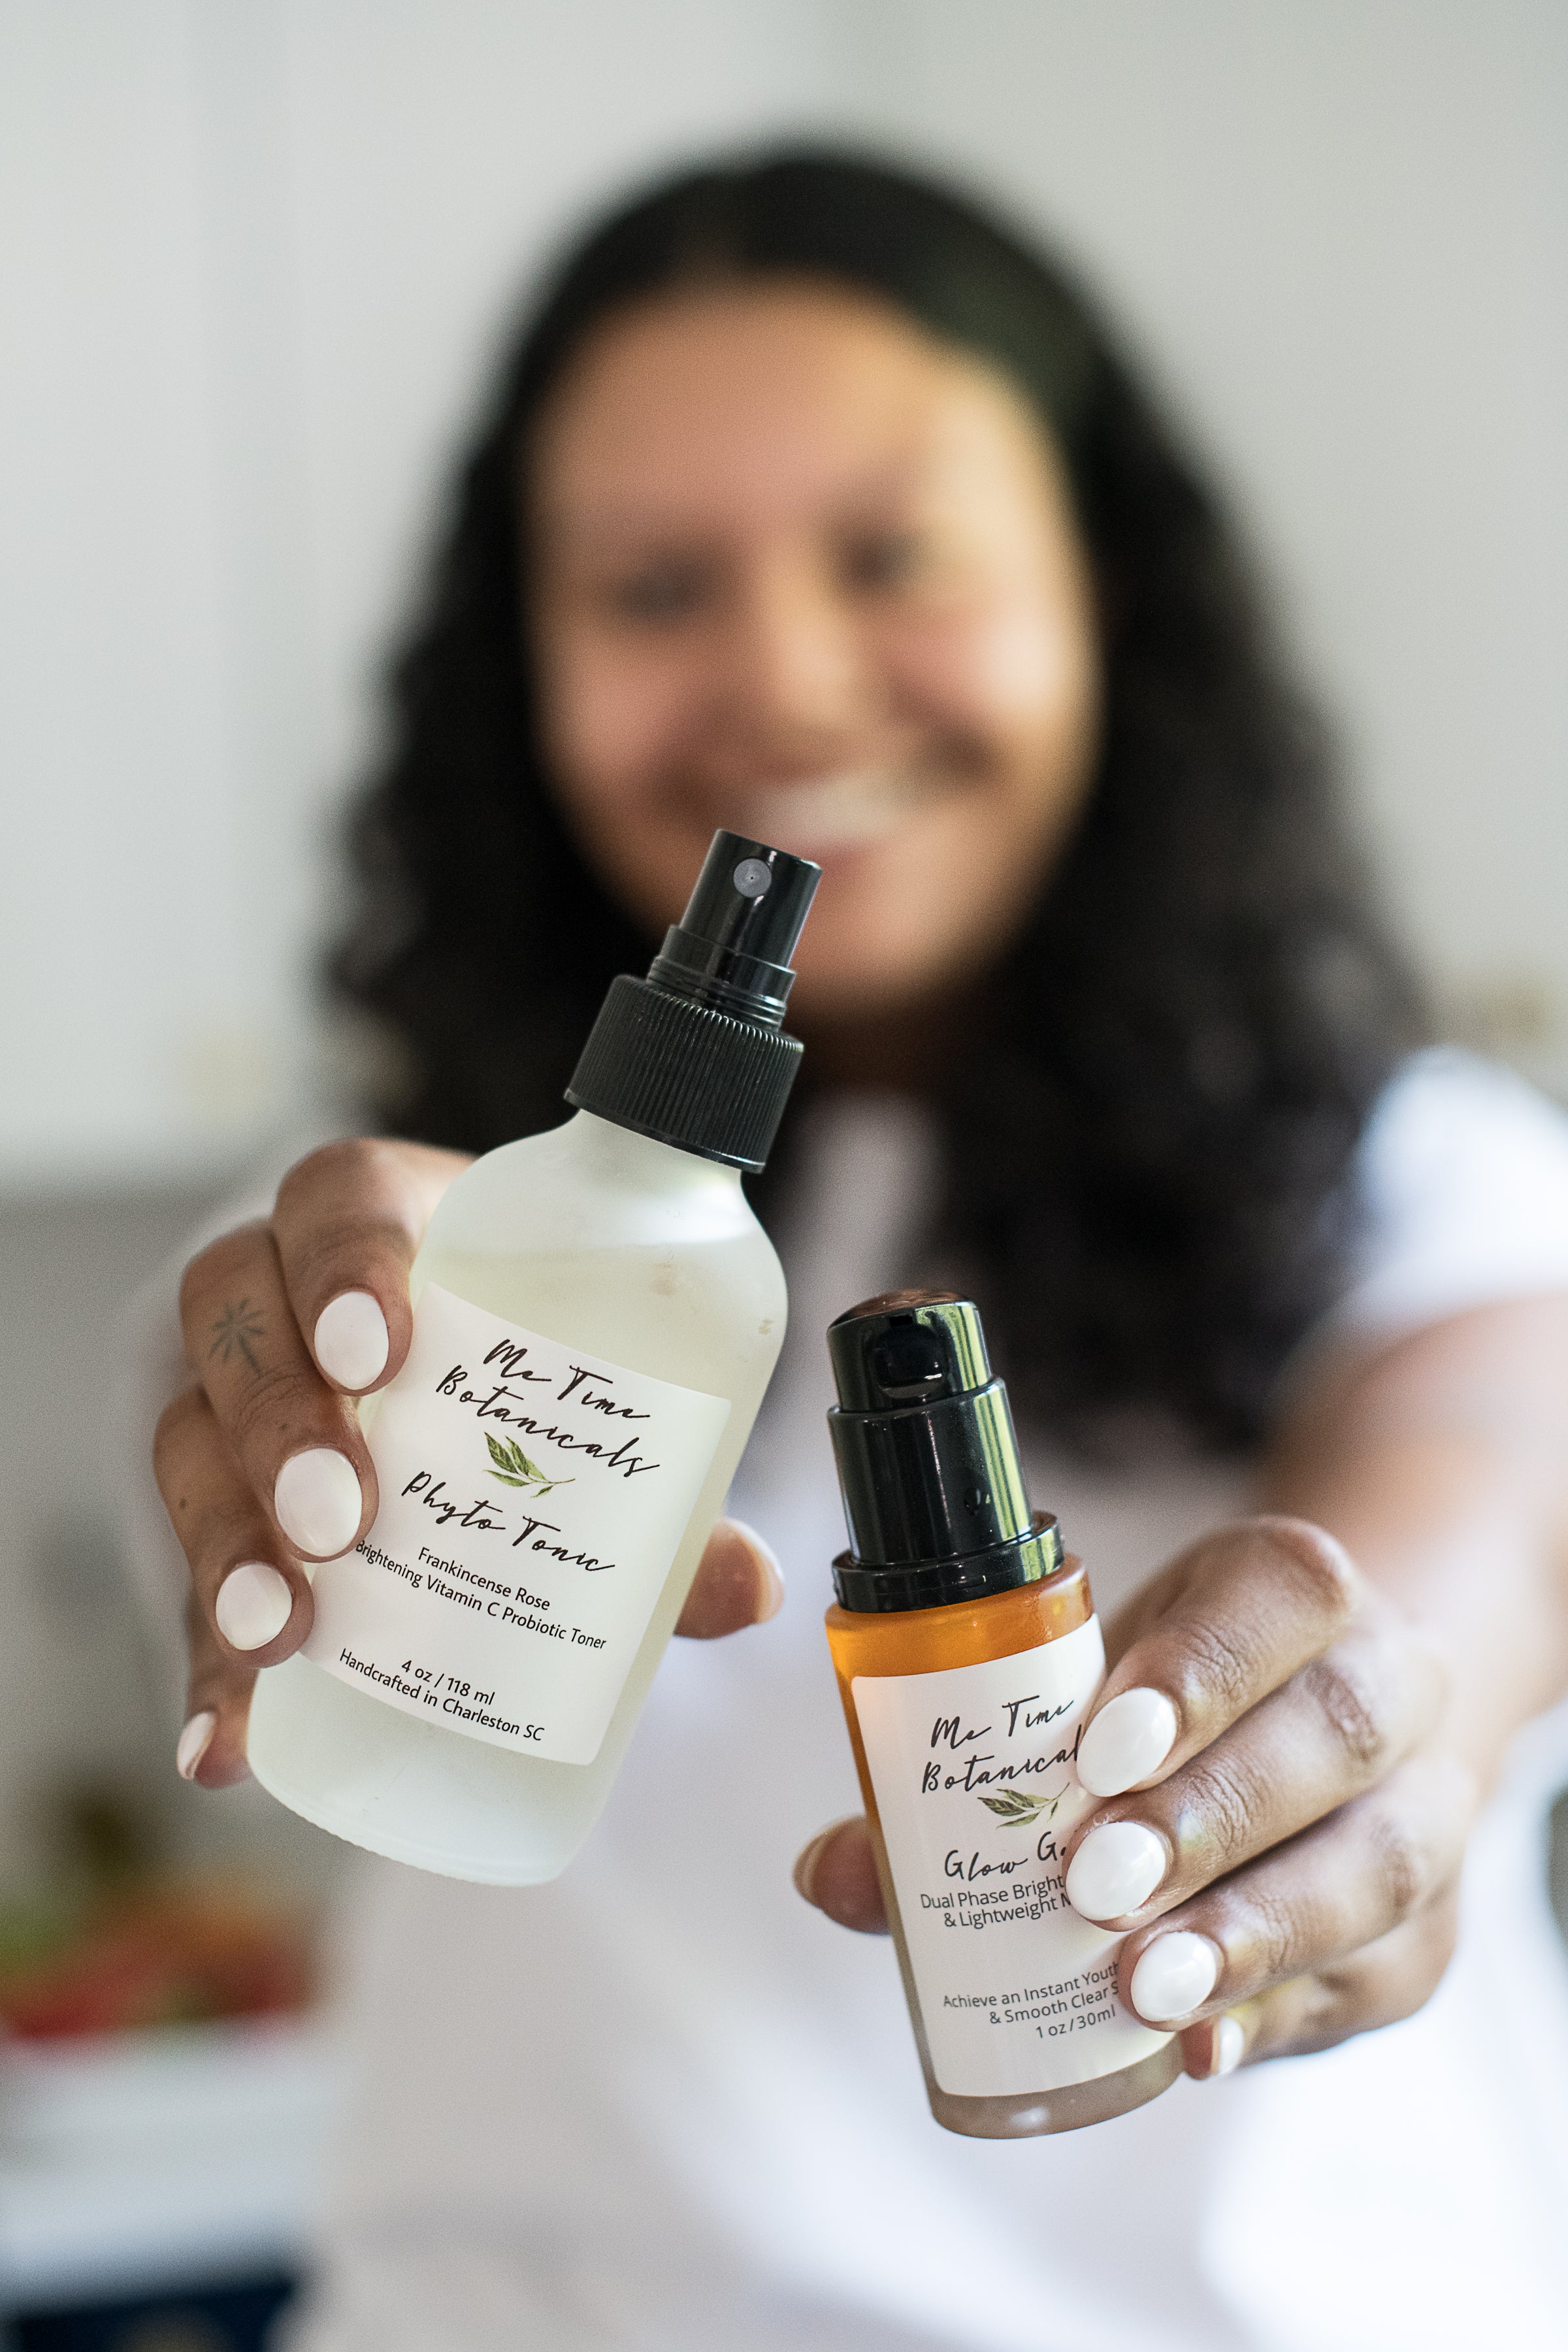 Me Time Botanicals  Natural, Cruelty-Free Skin Care